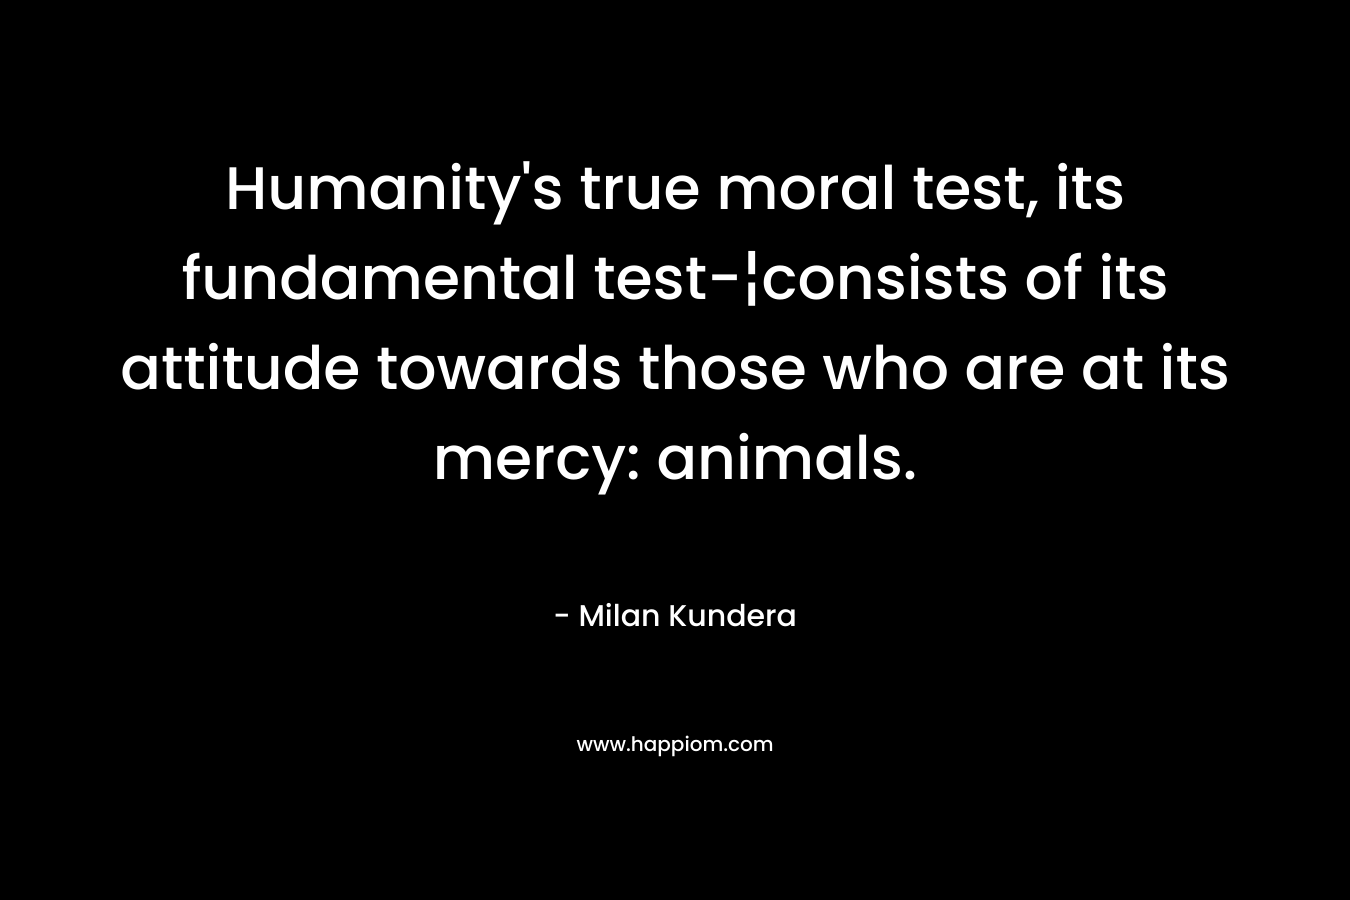 Humanity’s true moral test, its fundamental test-¦consists of its attitude towards those who are at its mercy: animals. – Milan Kundera